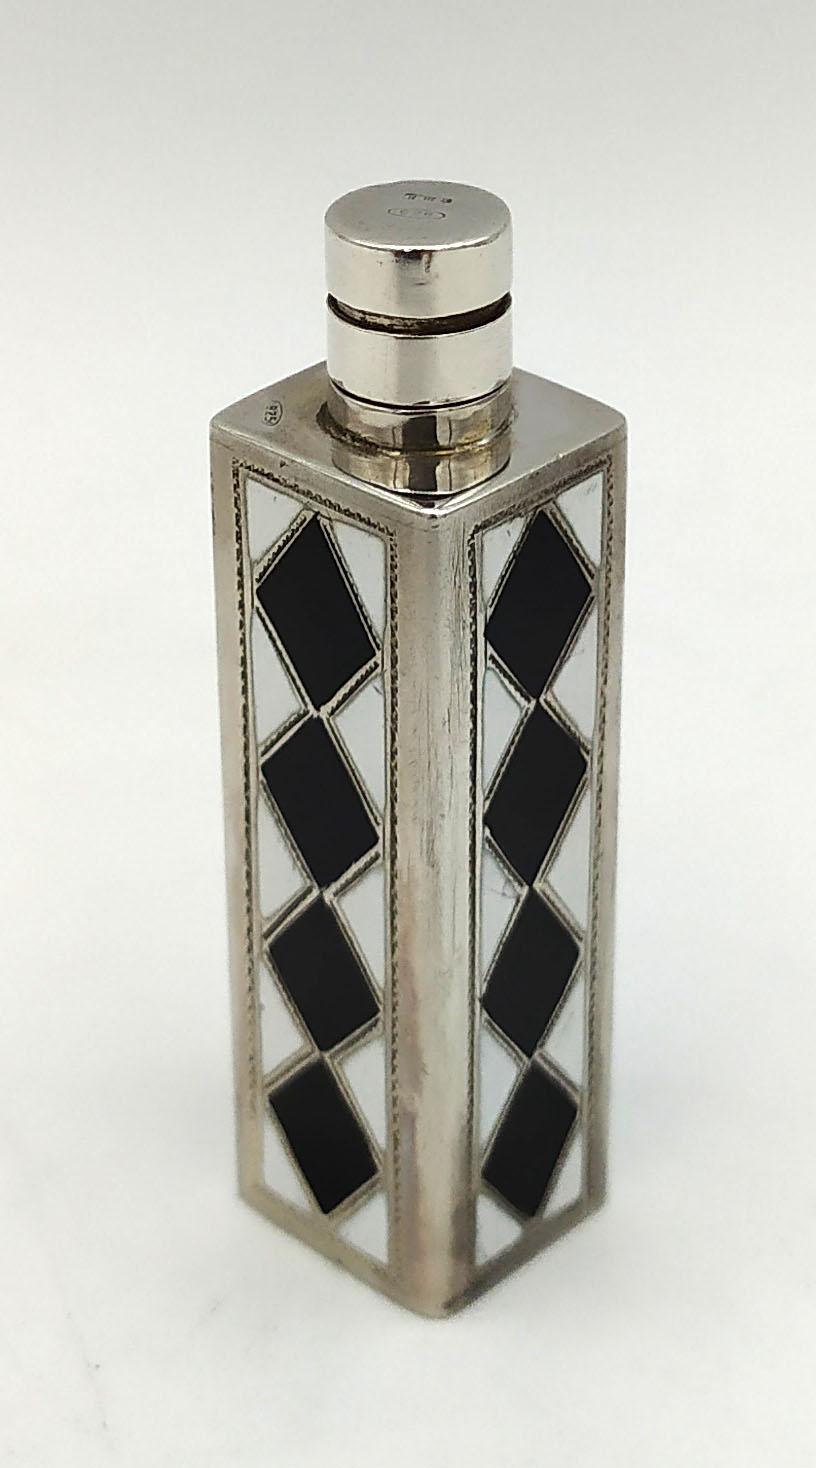 Hand-Carved Perfume holder Art Deco style enamel black and white Sterling Silver Salimbeni For Sale